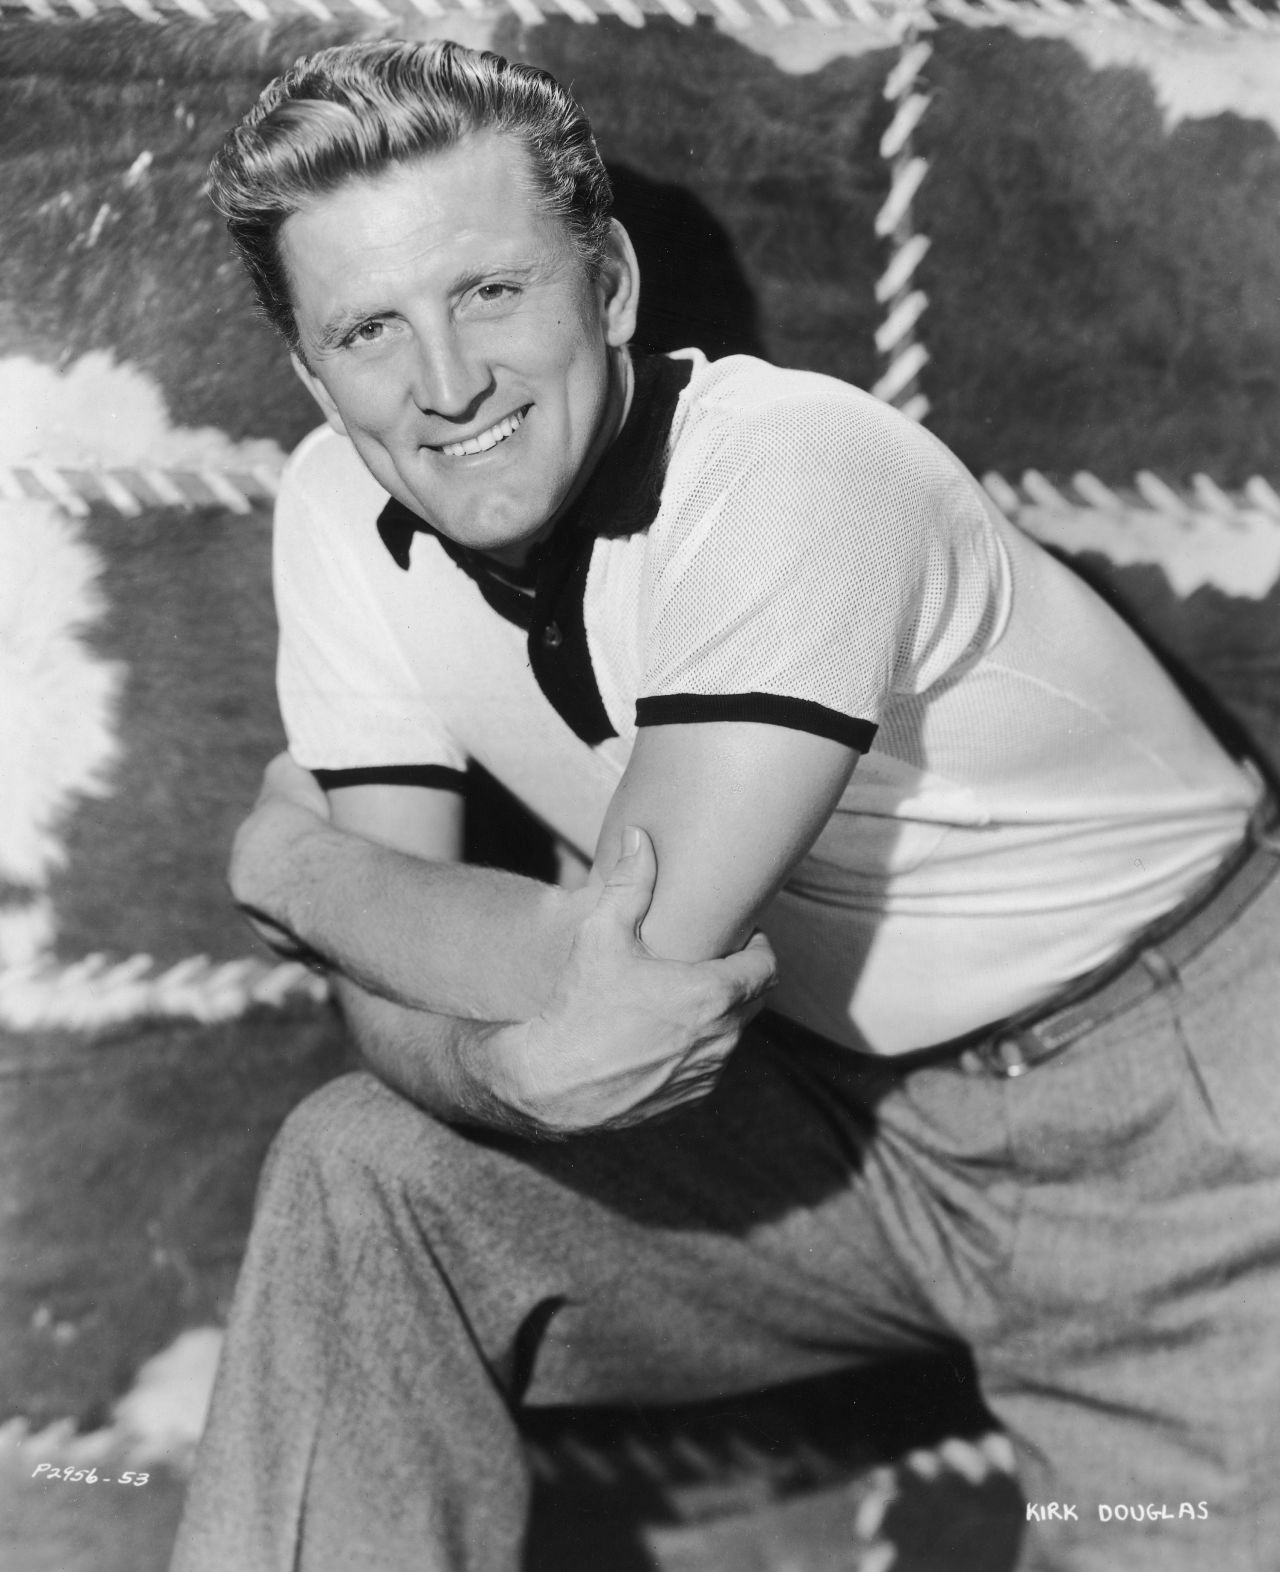 <a href="https://www.cnn.com/2020/02/05/entertainment/kirk-douglas-obit/index.html" target="_blank">Kirk Douglas</a>, one of the great Hollywood leading men whose off-screen life was nearly as colorful as his on-screen exploits, died February 5 at the age of 103, according to his son, actor Michael Douglas.